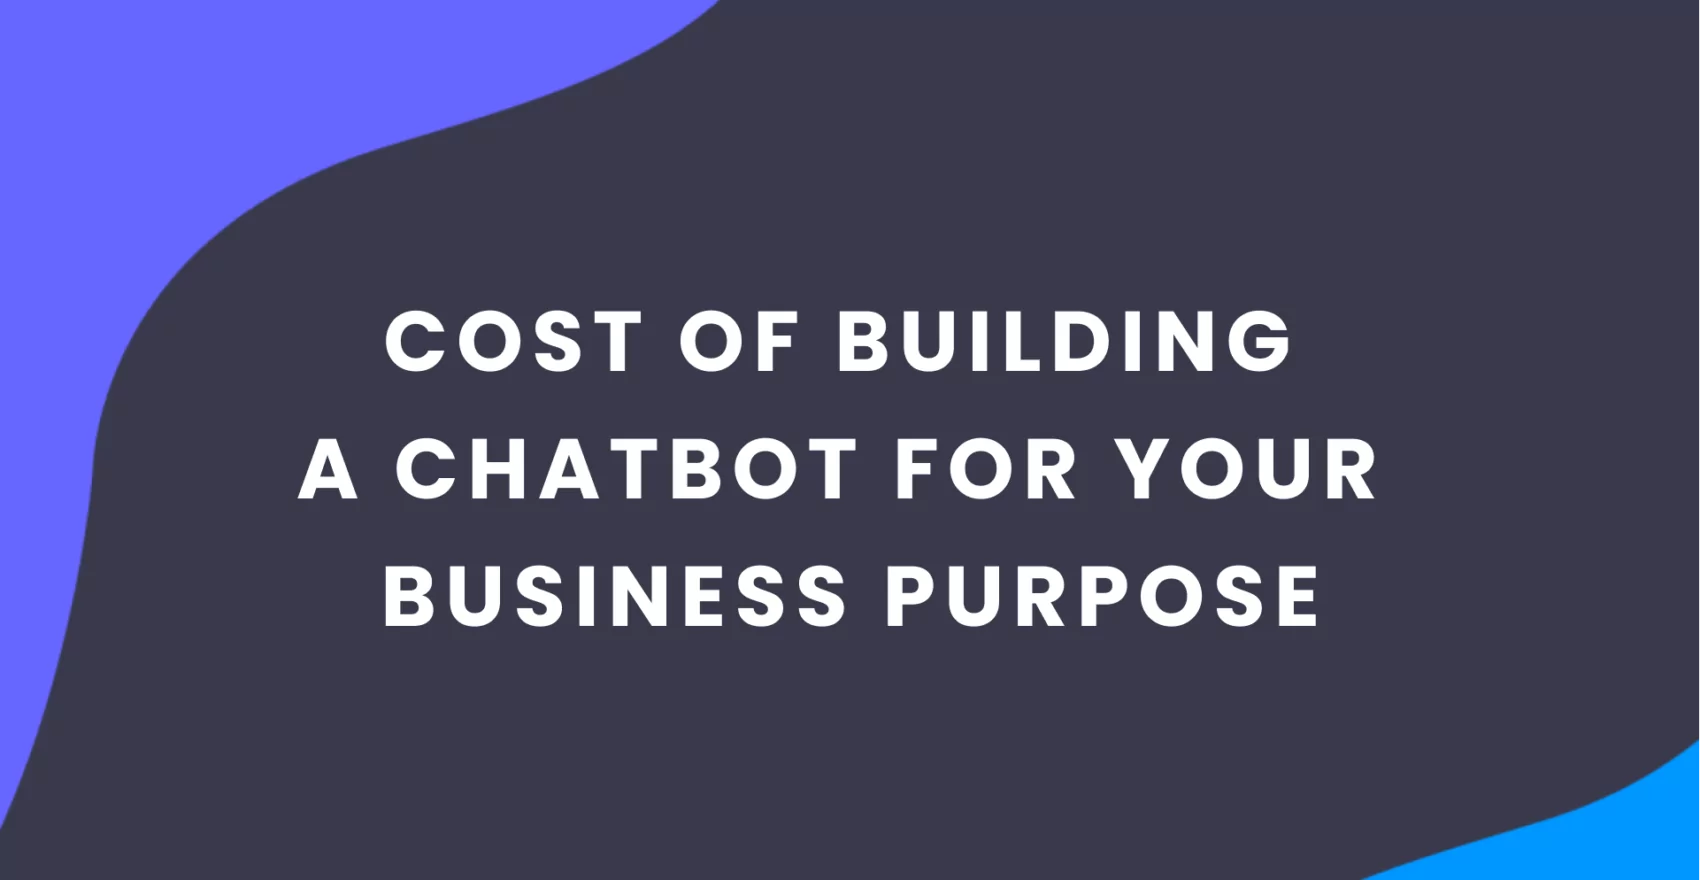 Cost of Building a Chatbot for Your Business Purpose